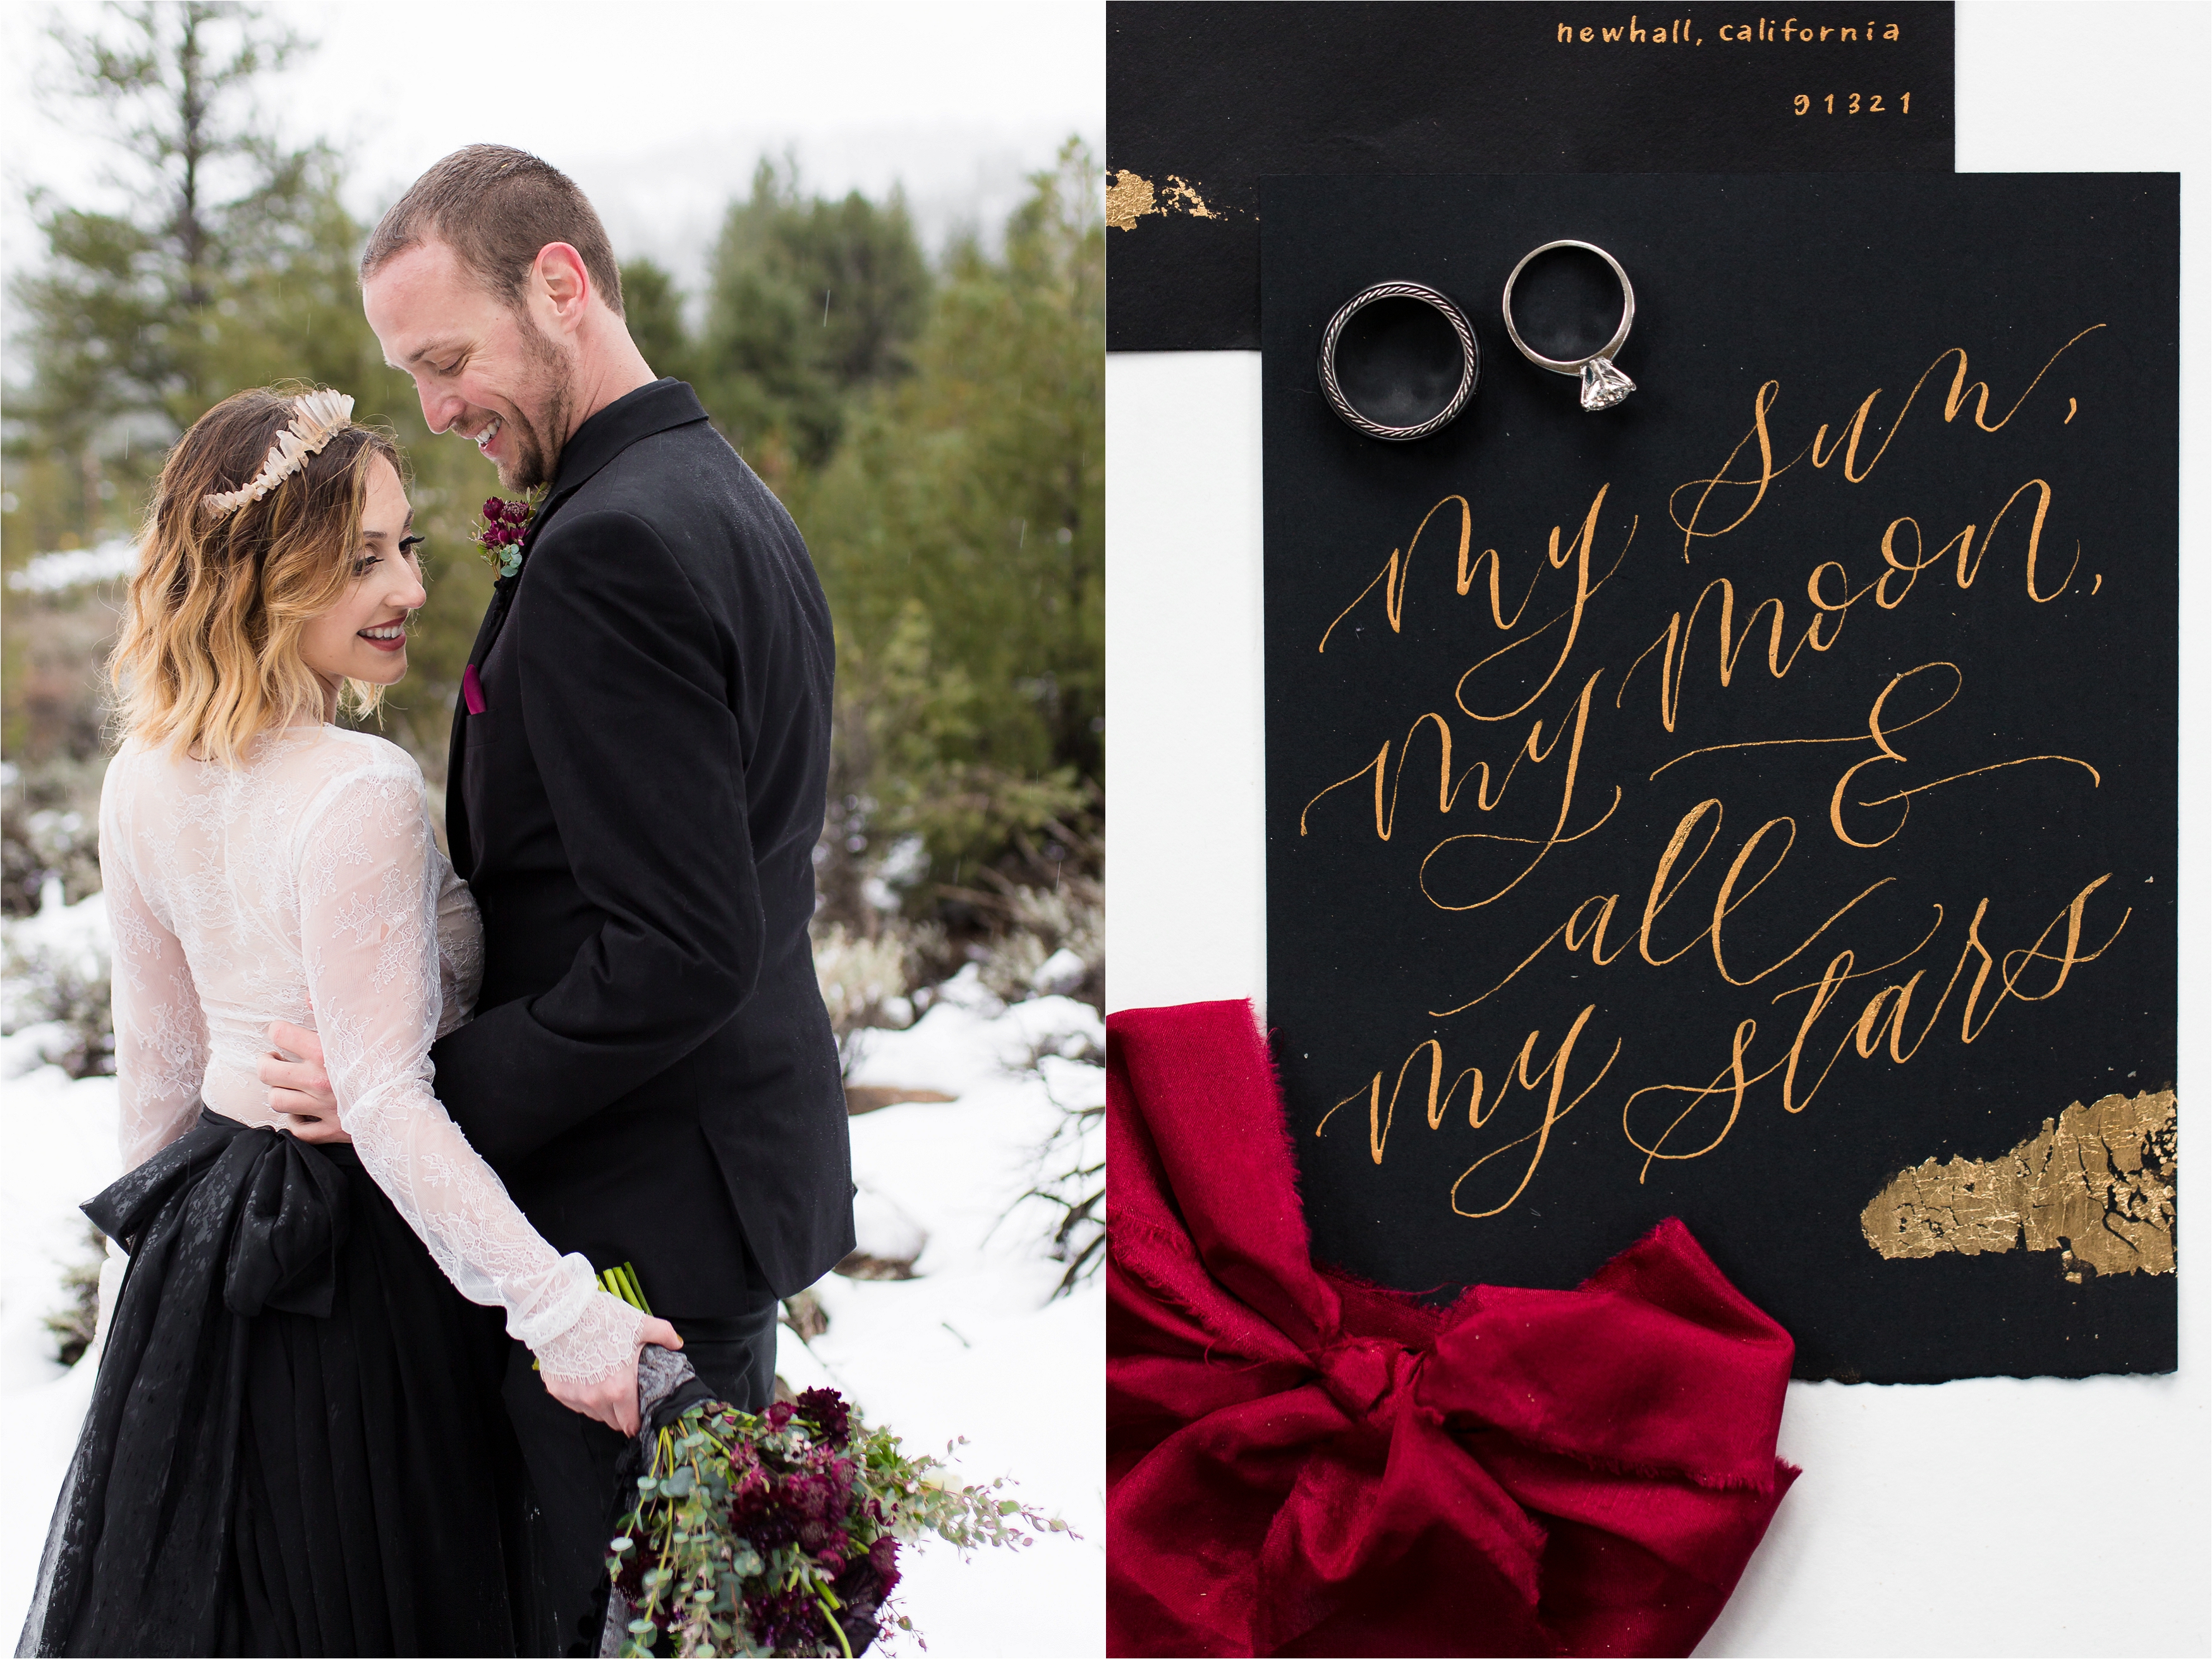 Wedding rings on black stationery with gold text